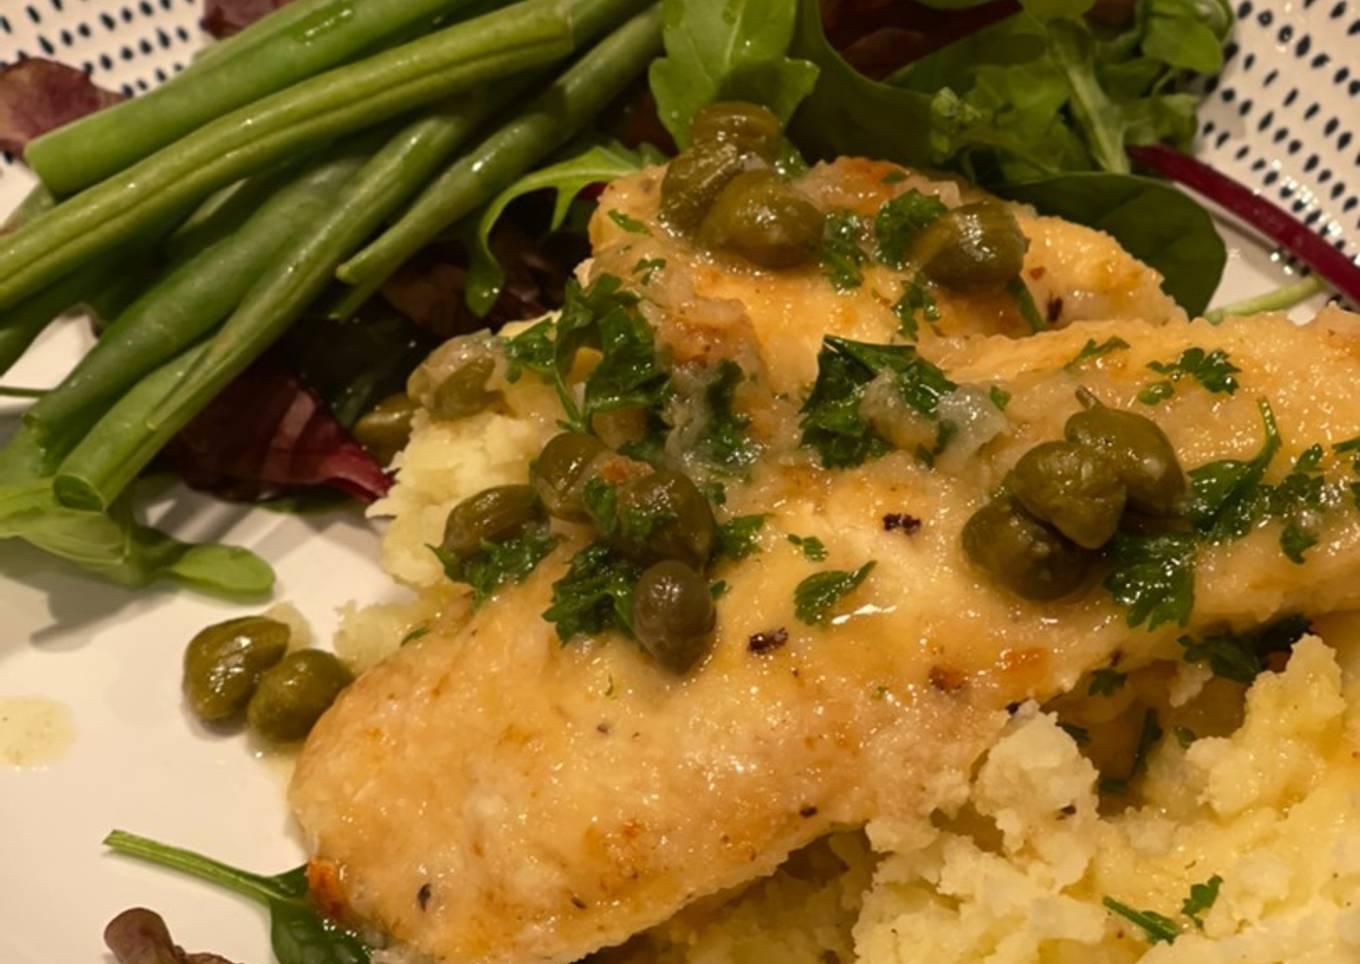 Chicken Breasts in a Lemon and Caper Sauce